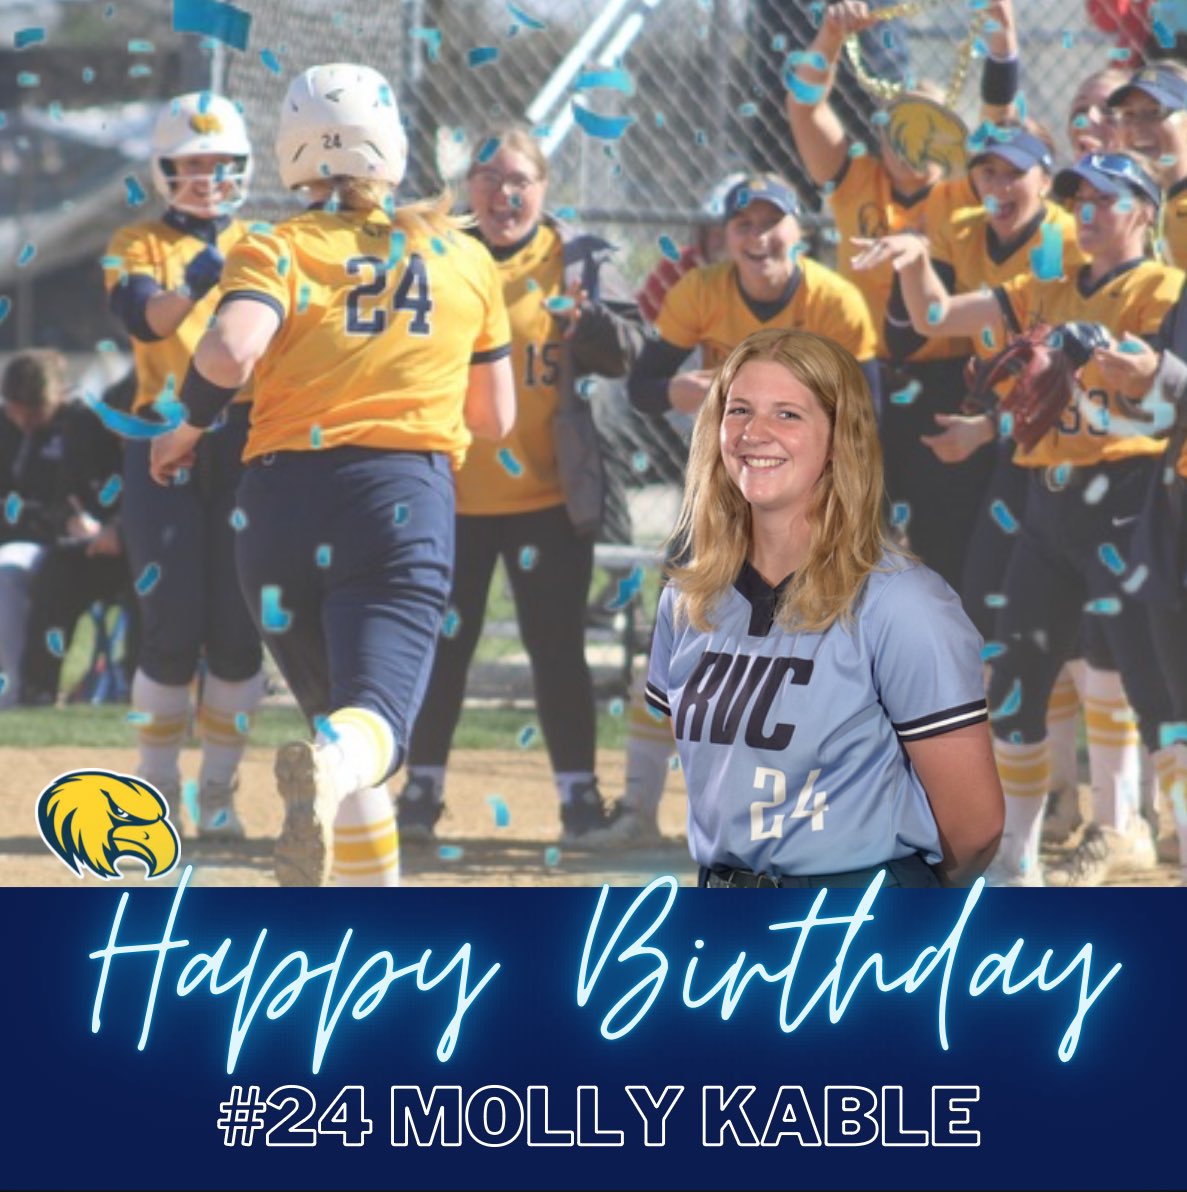 Happy Birthday to #24 Molly Kable. We hope you had a spectacular day!